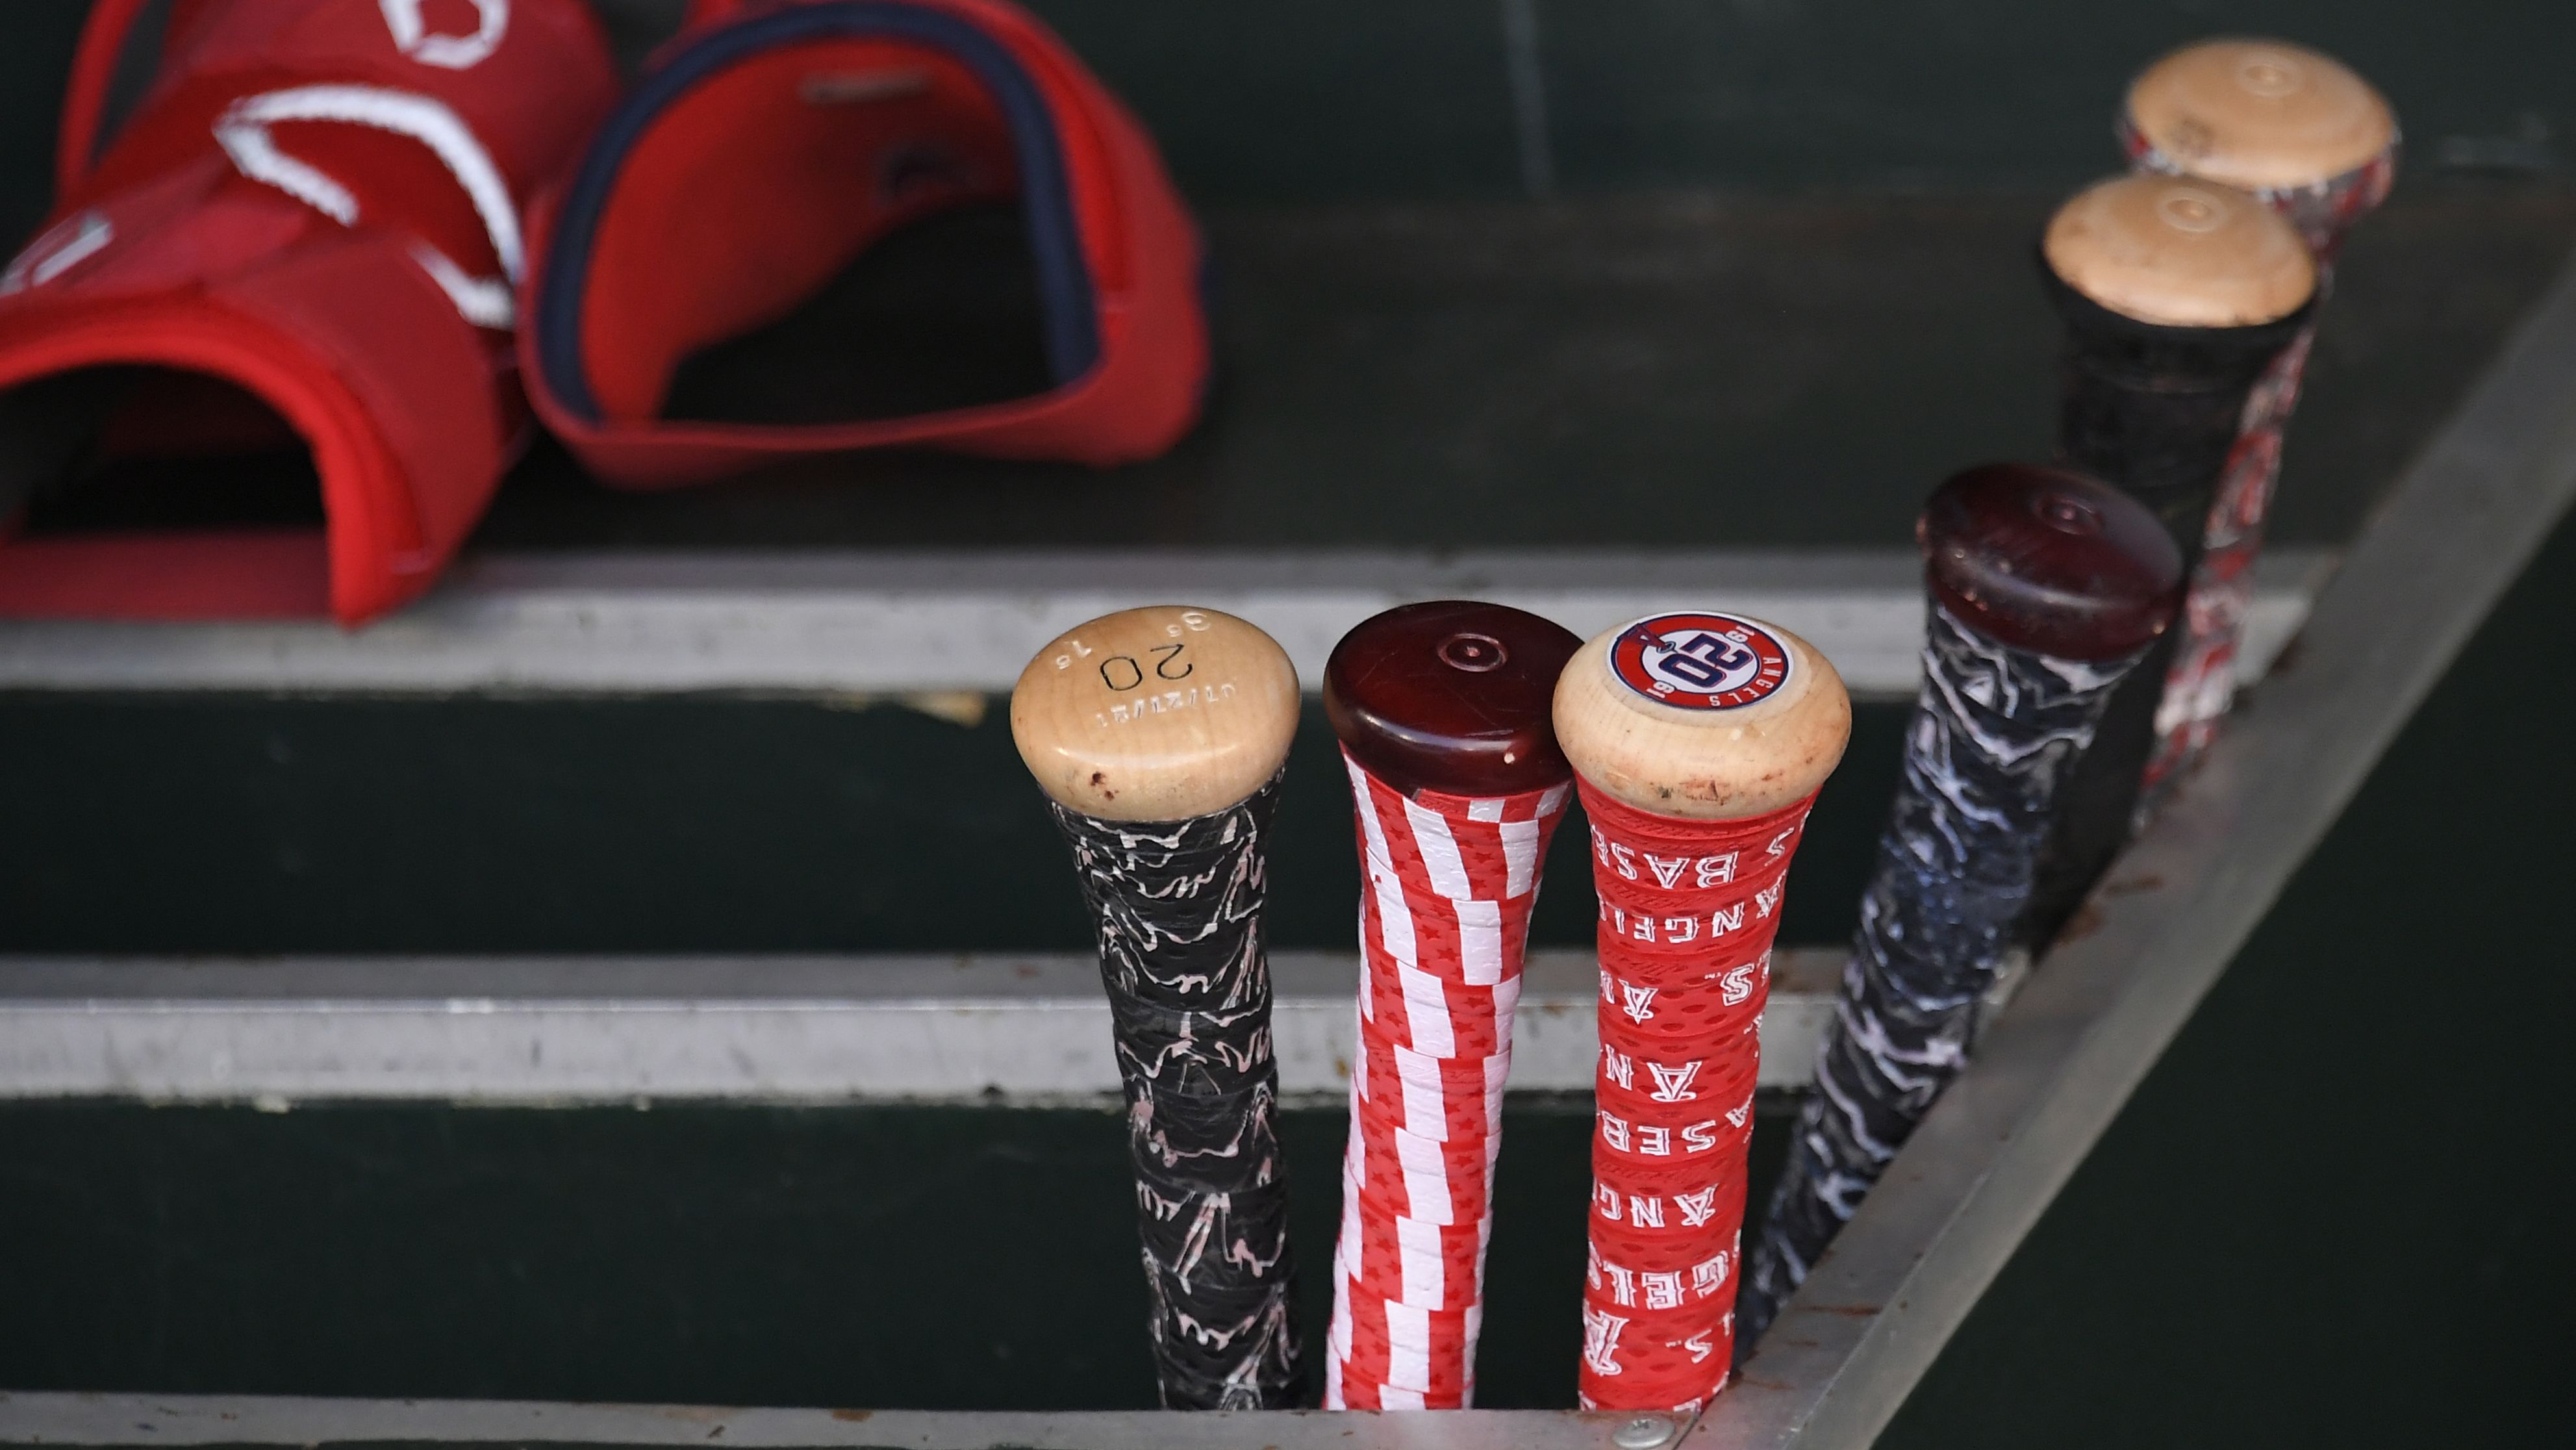 A view of Los Angeles Angels' Jared Walsh's bats and the tape jobs on the handles before a game.